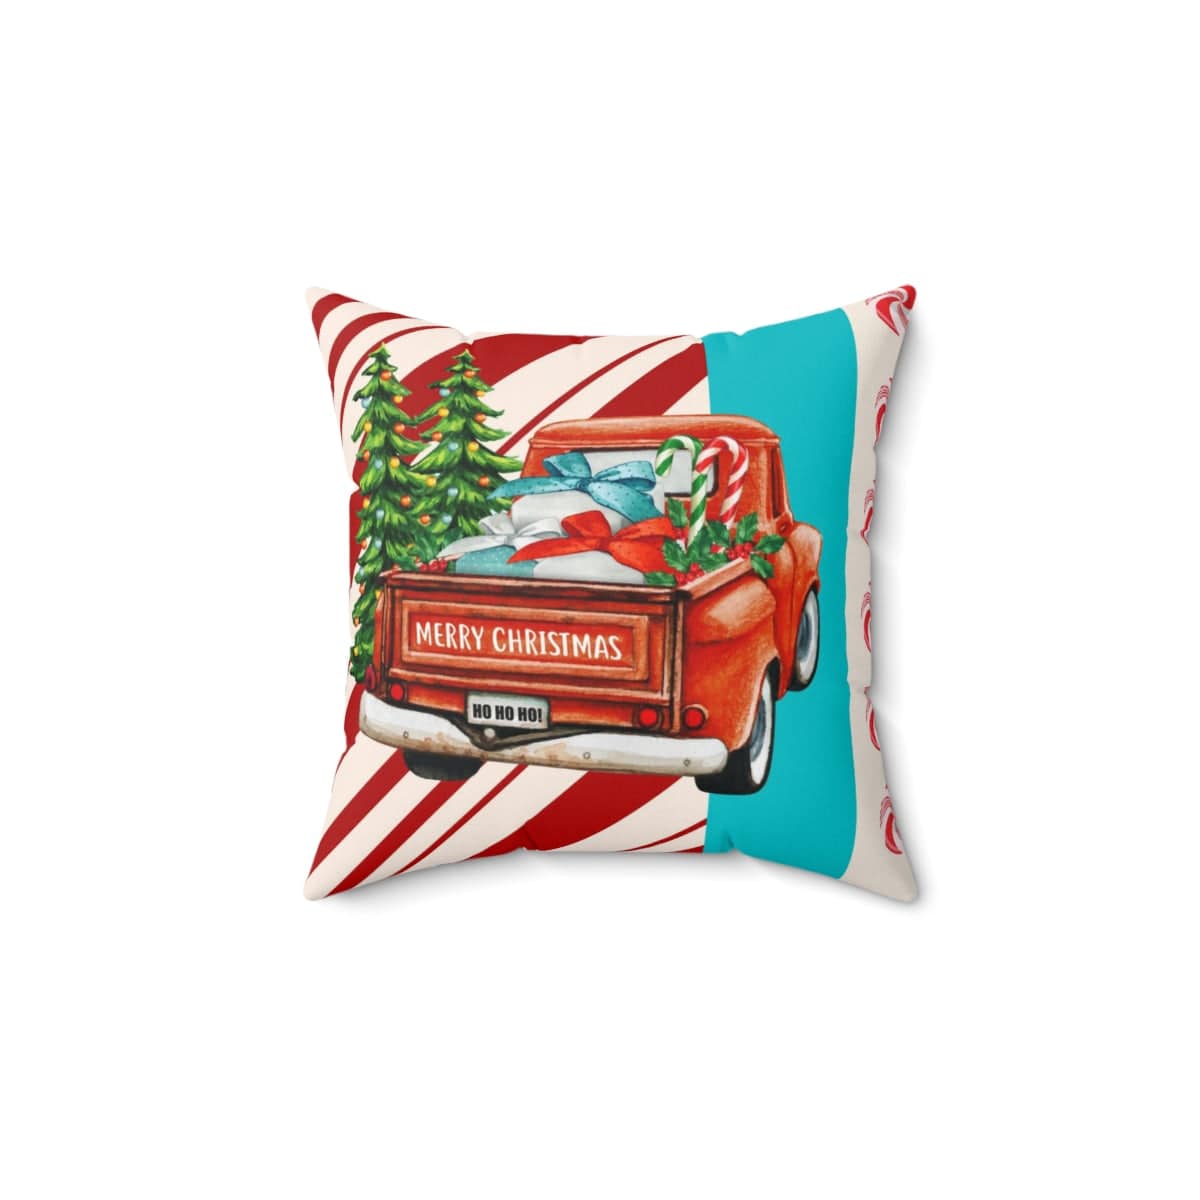 Mid Century Christmas, Old Timey Red Pick Up Truck, Merry Christmas, Candy Cane Stripe, Aqua Blue, Retro Holiday Gift Pillow And Insert Home Decor